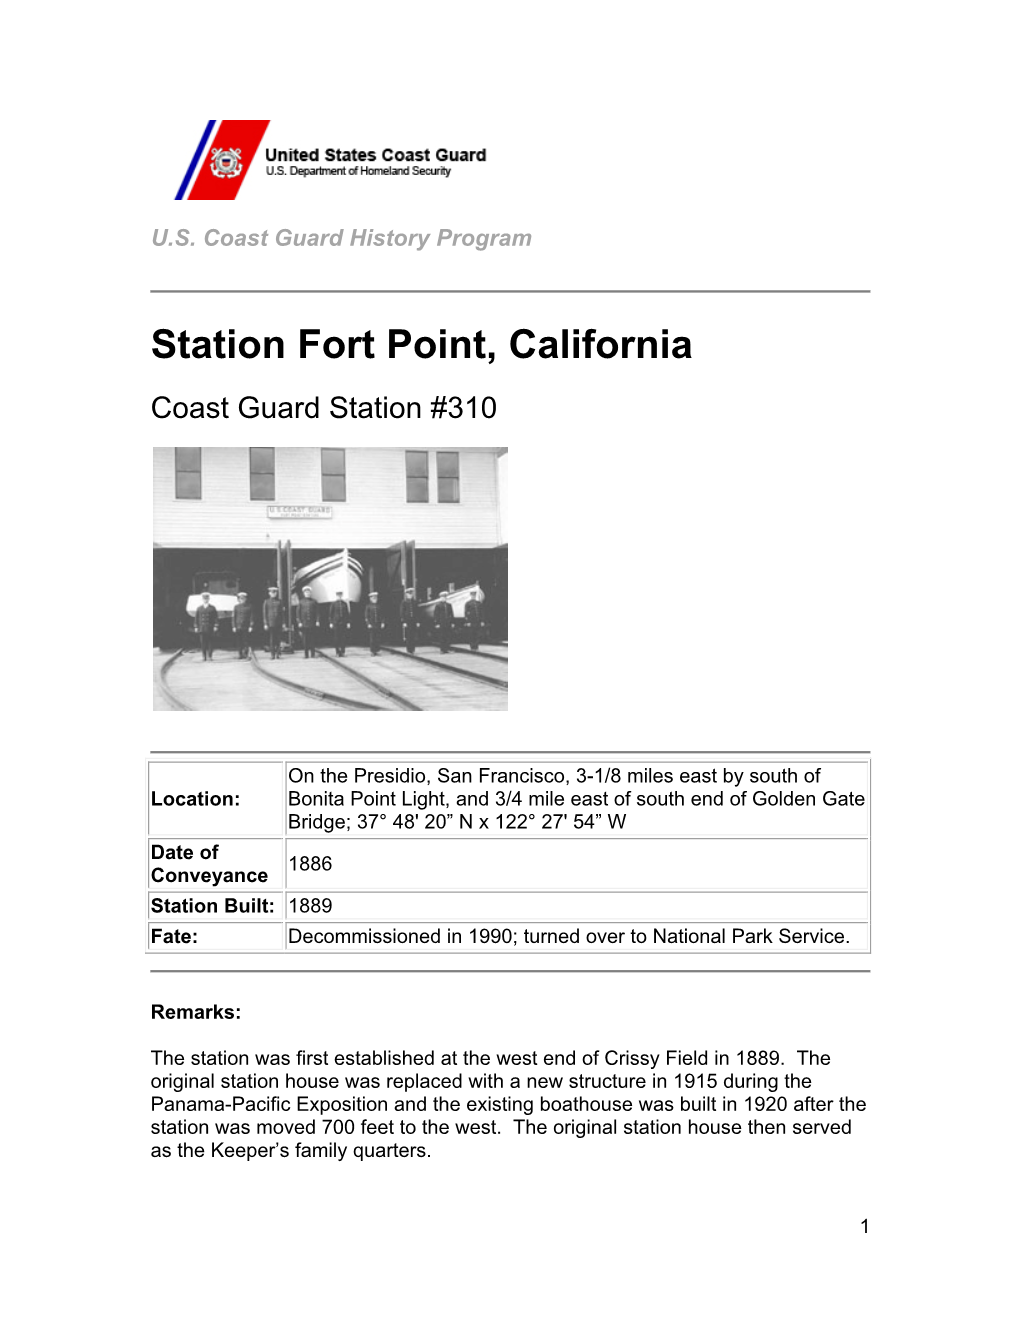 Station Fort Point, California Coast Guard Station #310